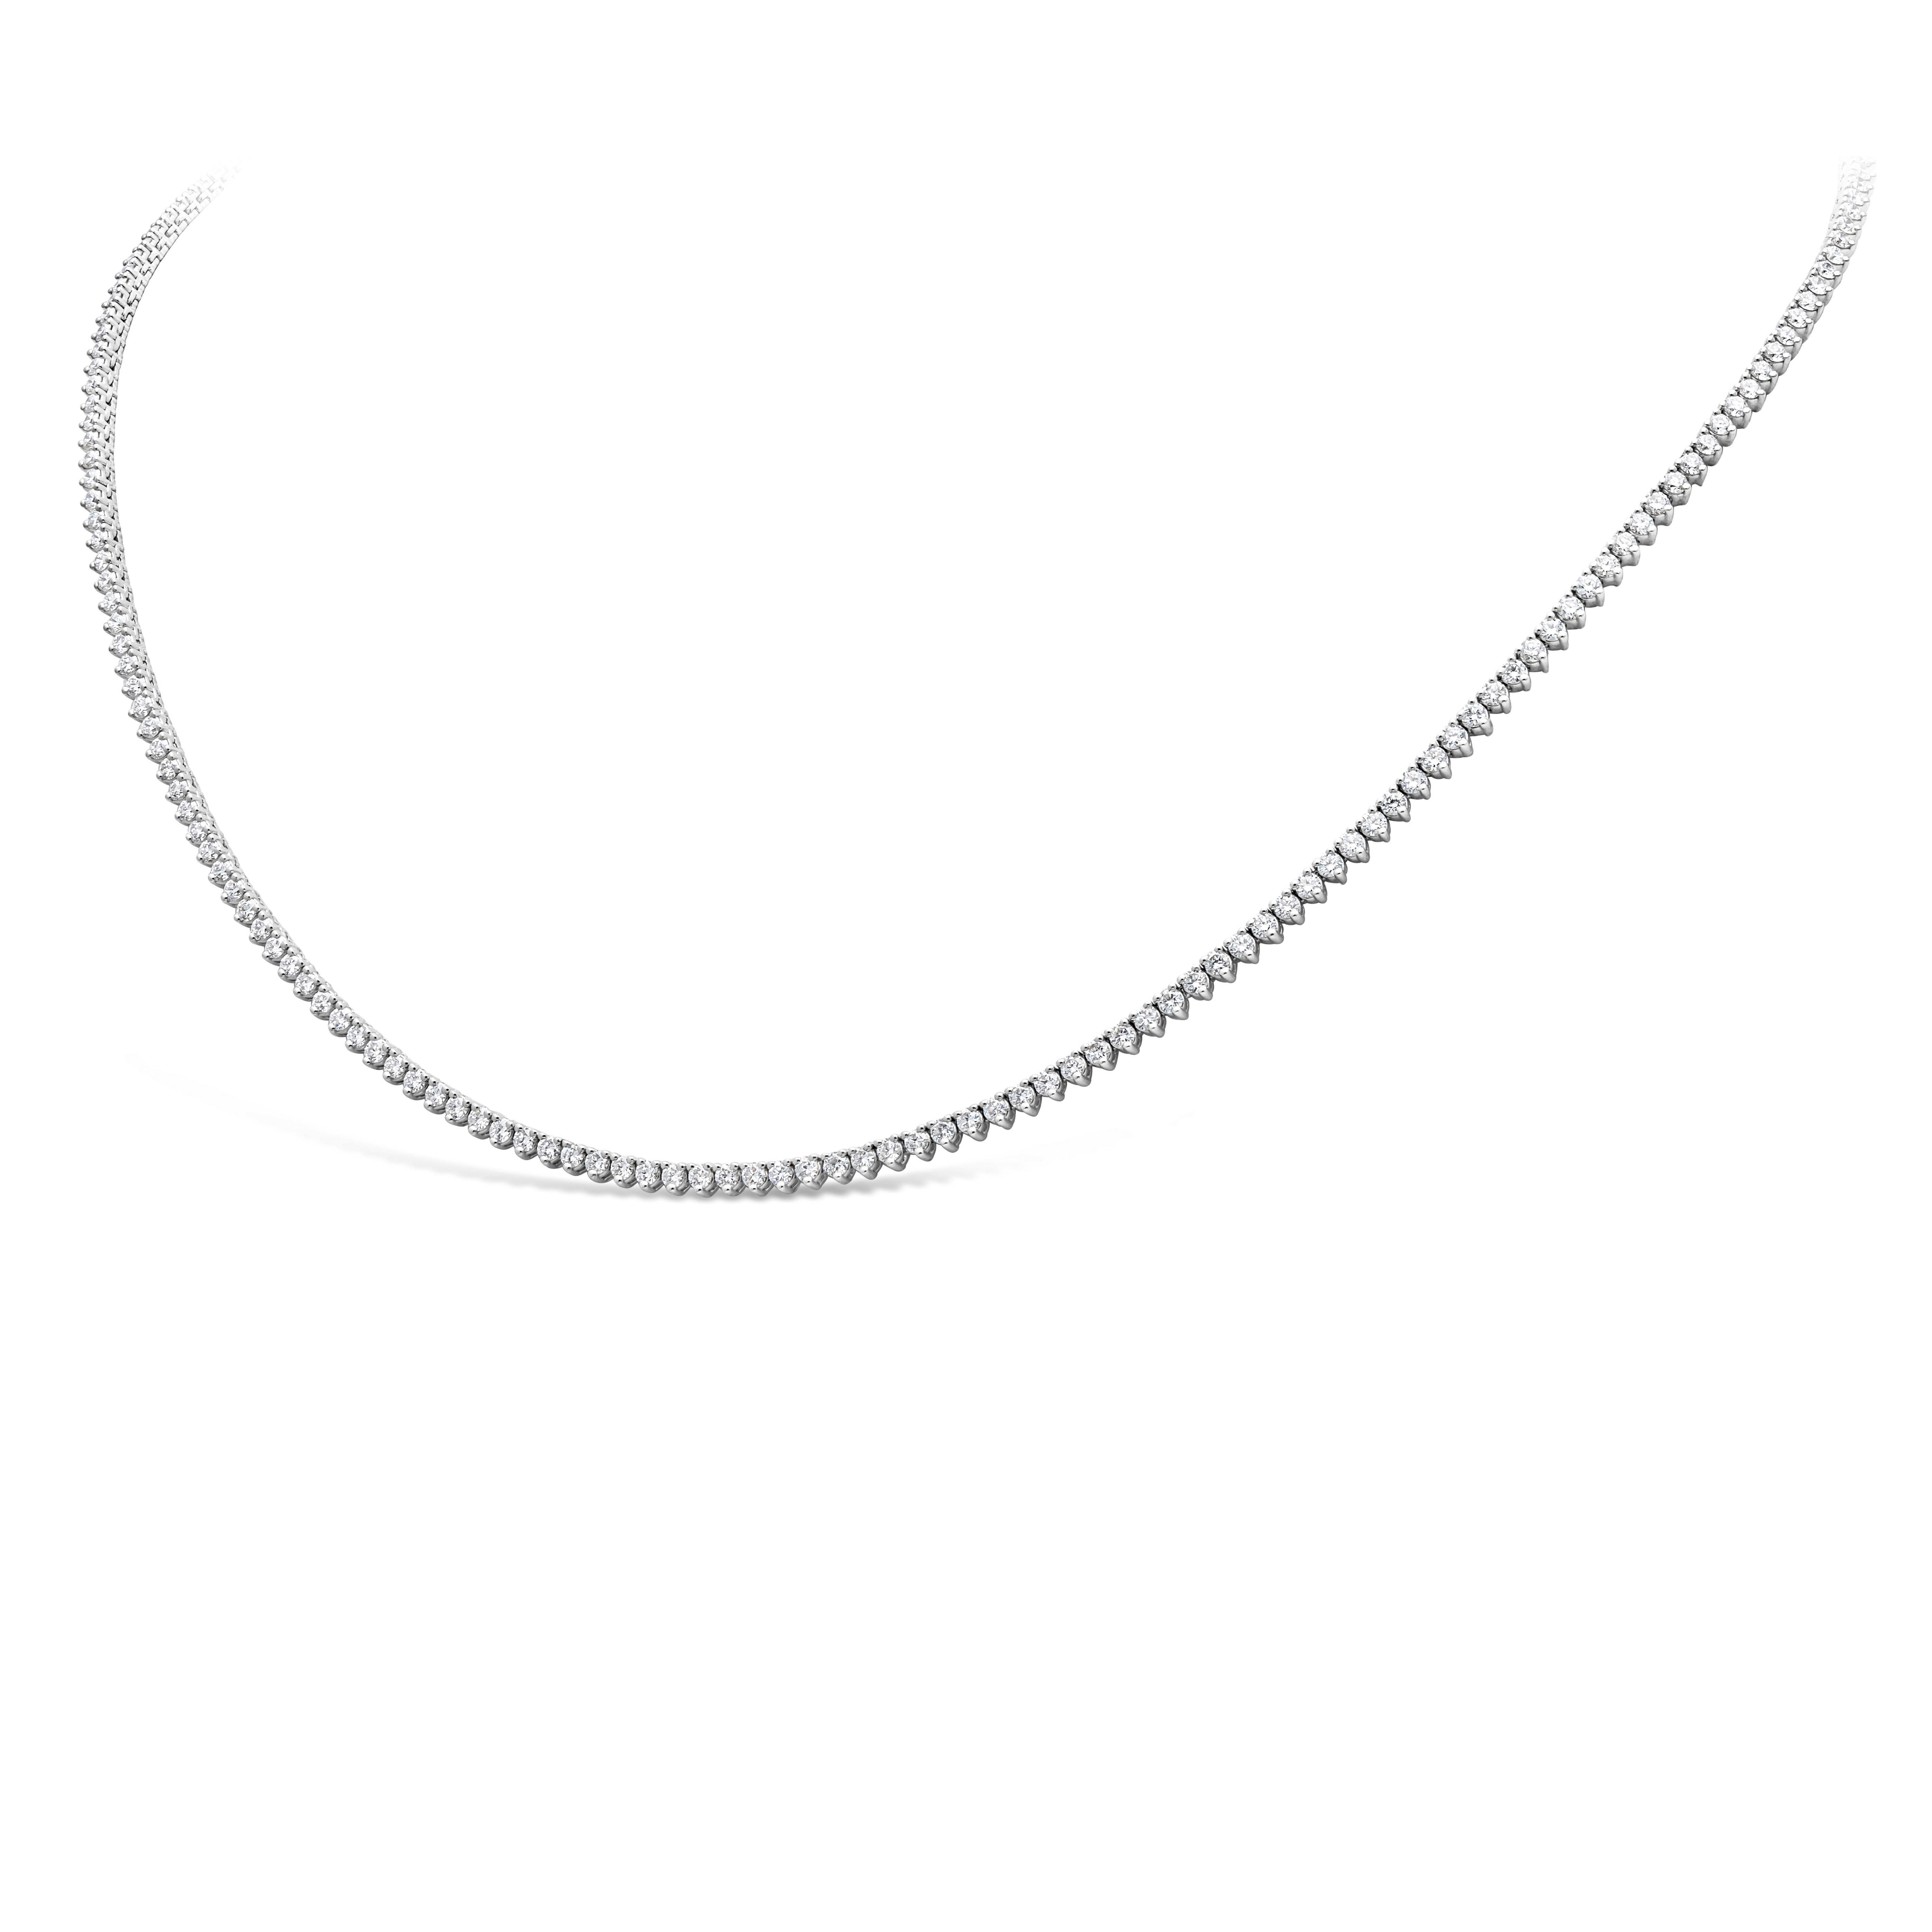 A classic tennis necklace style showcasing 215 brilliant round diamonds, set in a polished 18K White Gold. Diamonds weigh 4.03 carats total set in three prong and are approximately G color, VS clarity. 16 inches in Length.  

Roman Malakov is a